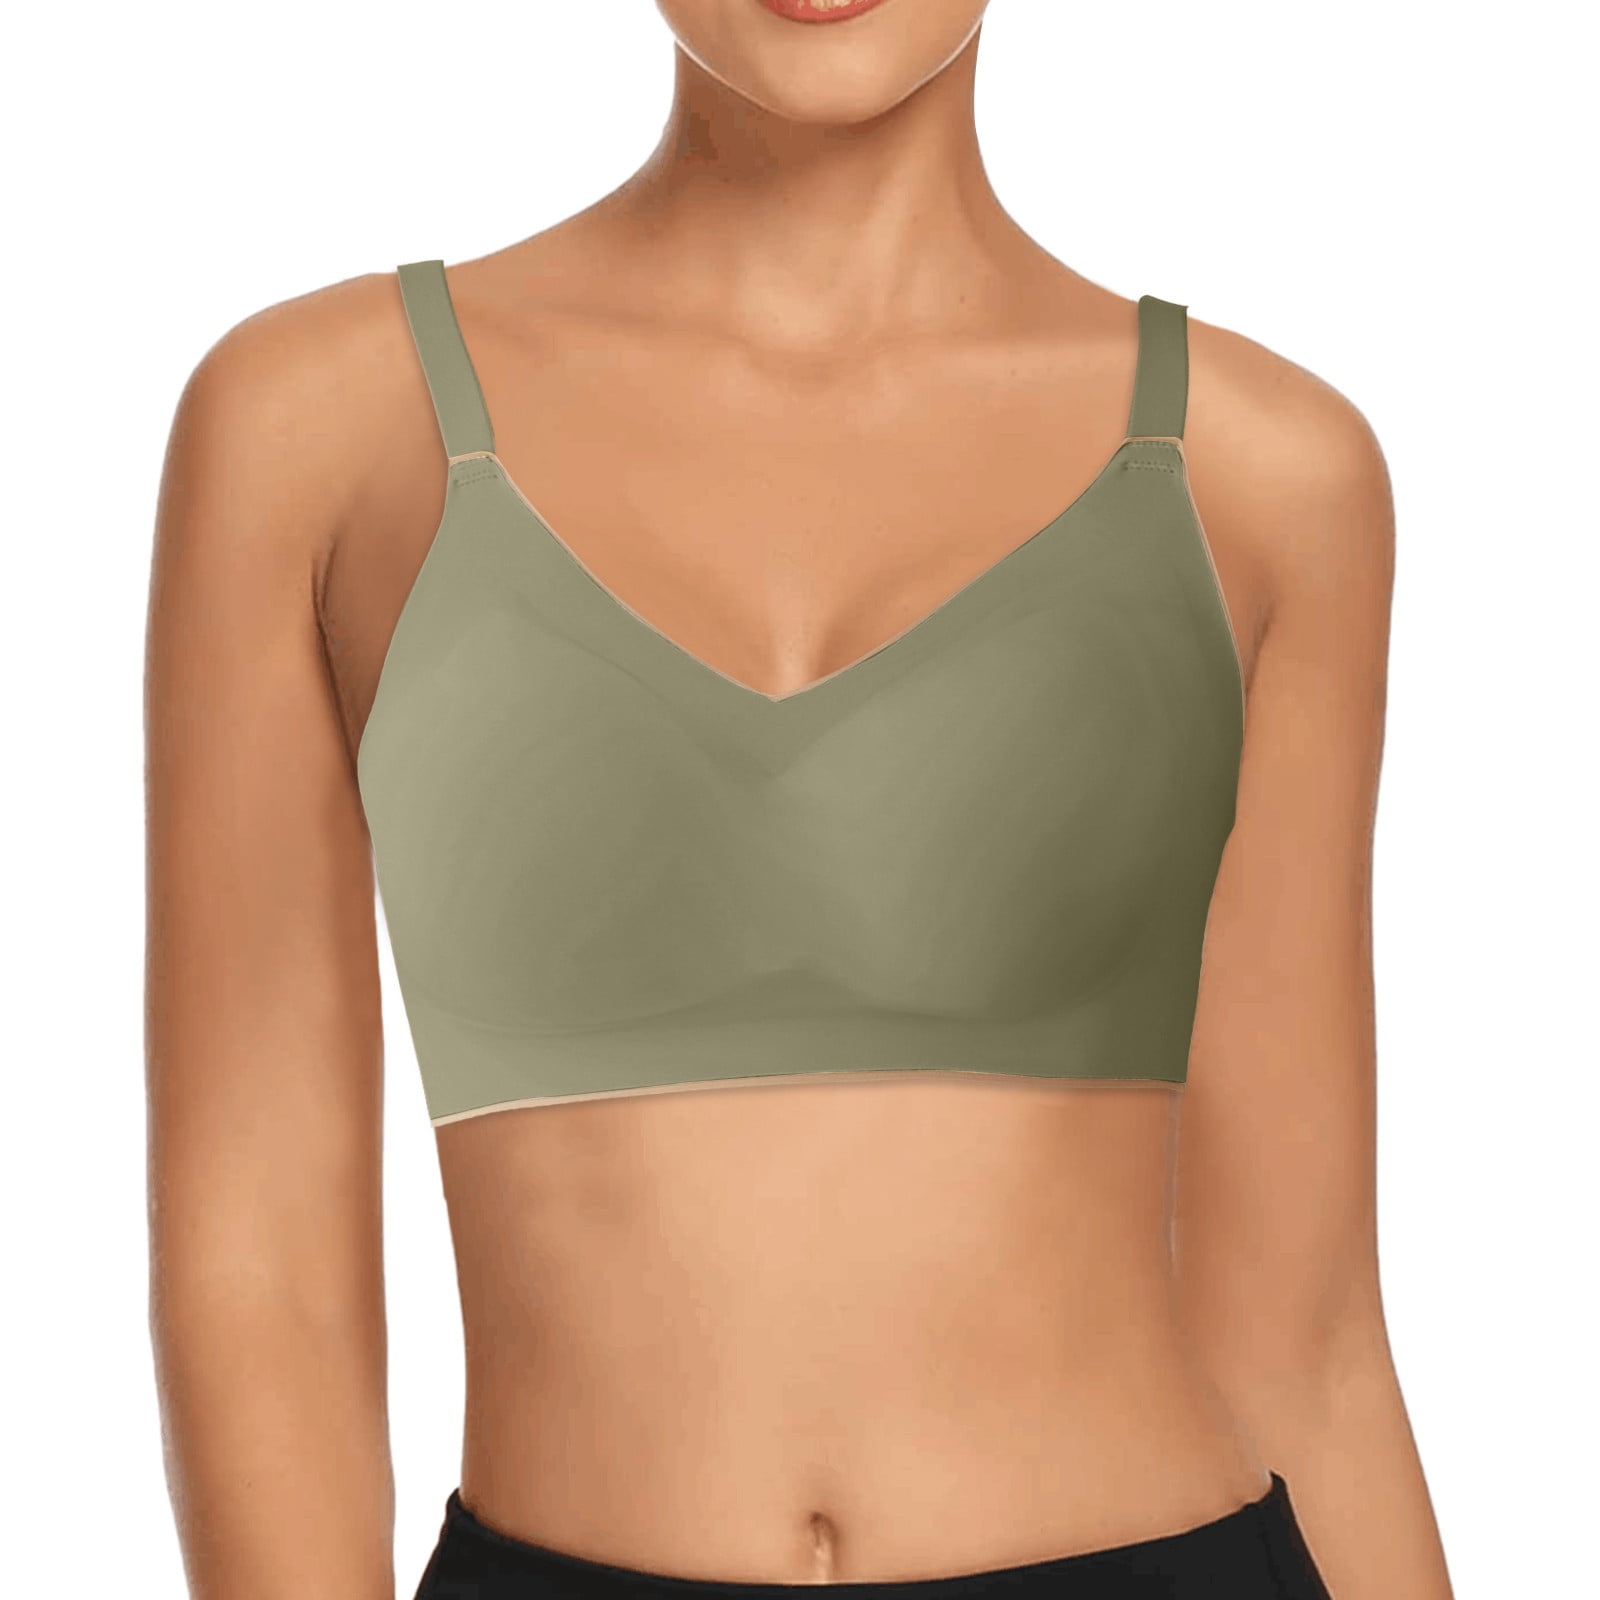 adviicd Under Outfit Bras for Women Women's Full Coverage Front